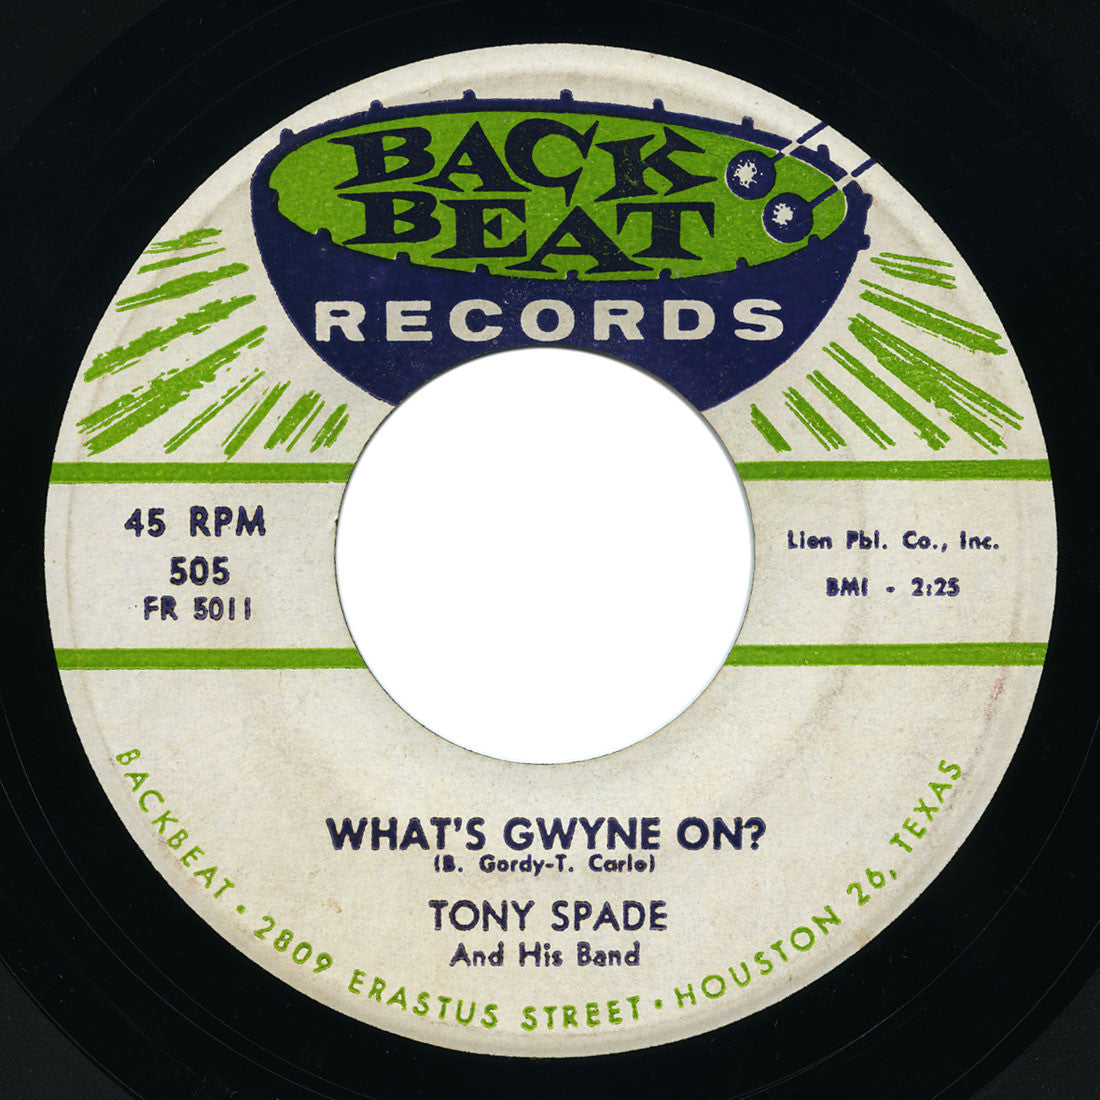 Tony Spade - What’s Gwyne On? / Life Is A Mystery - Back Beat